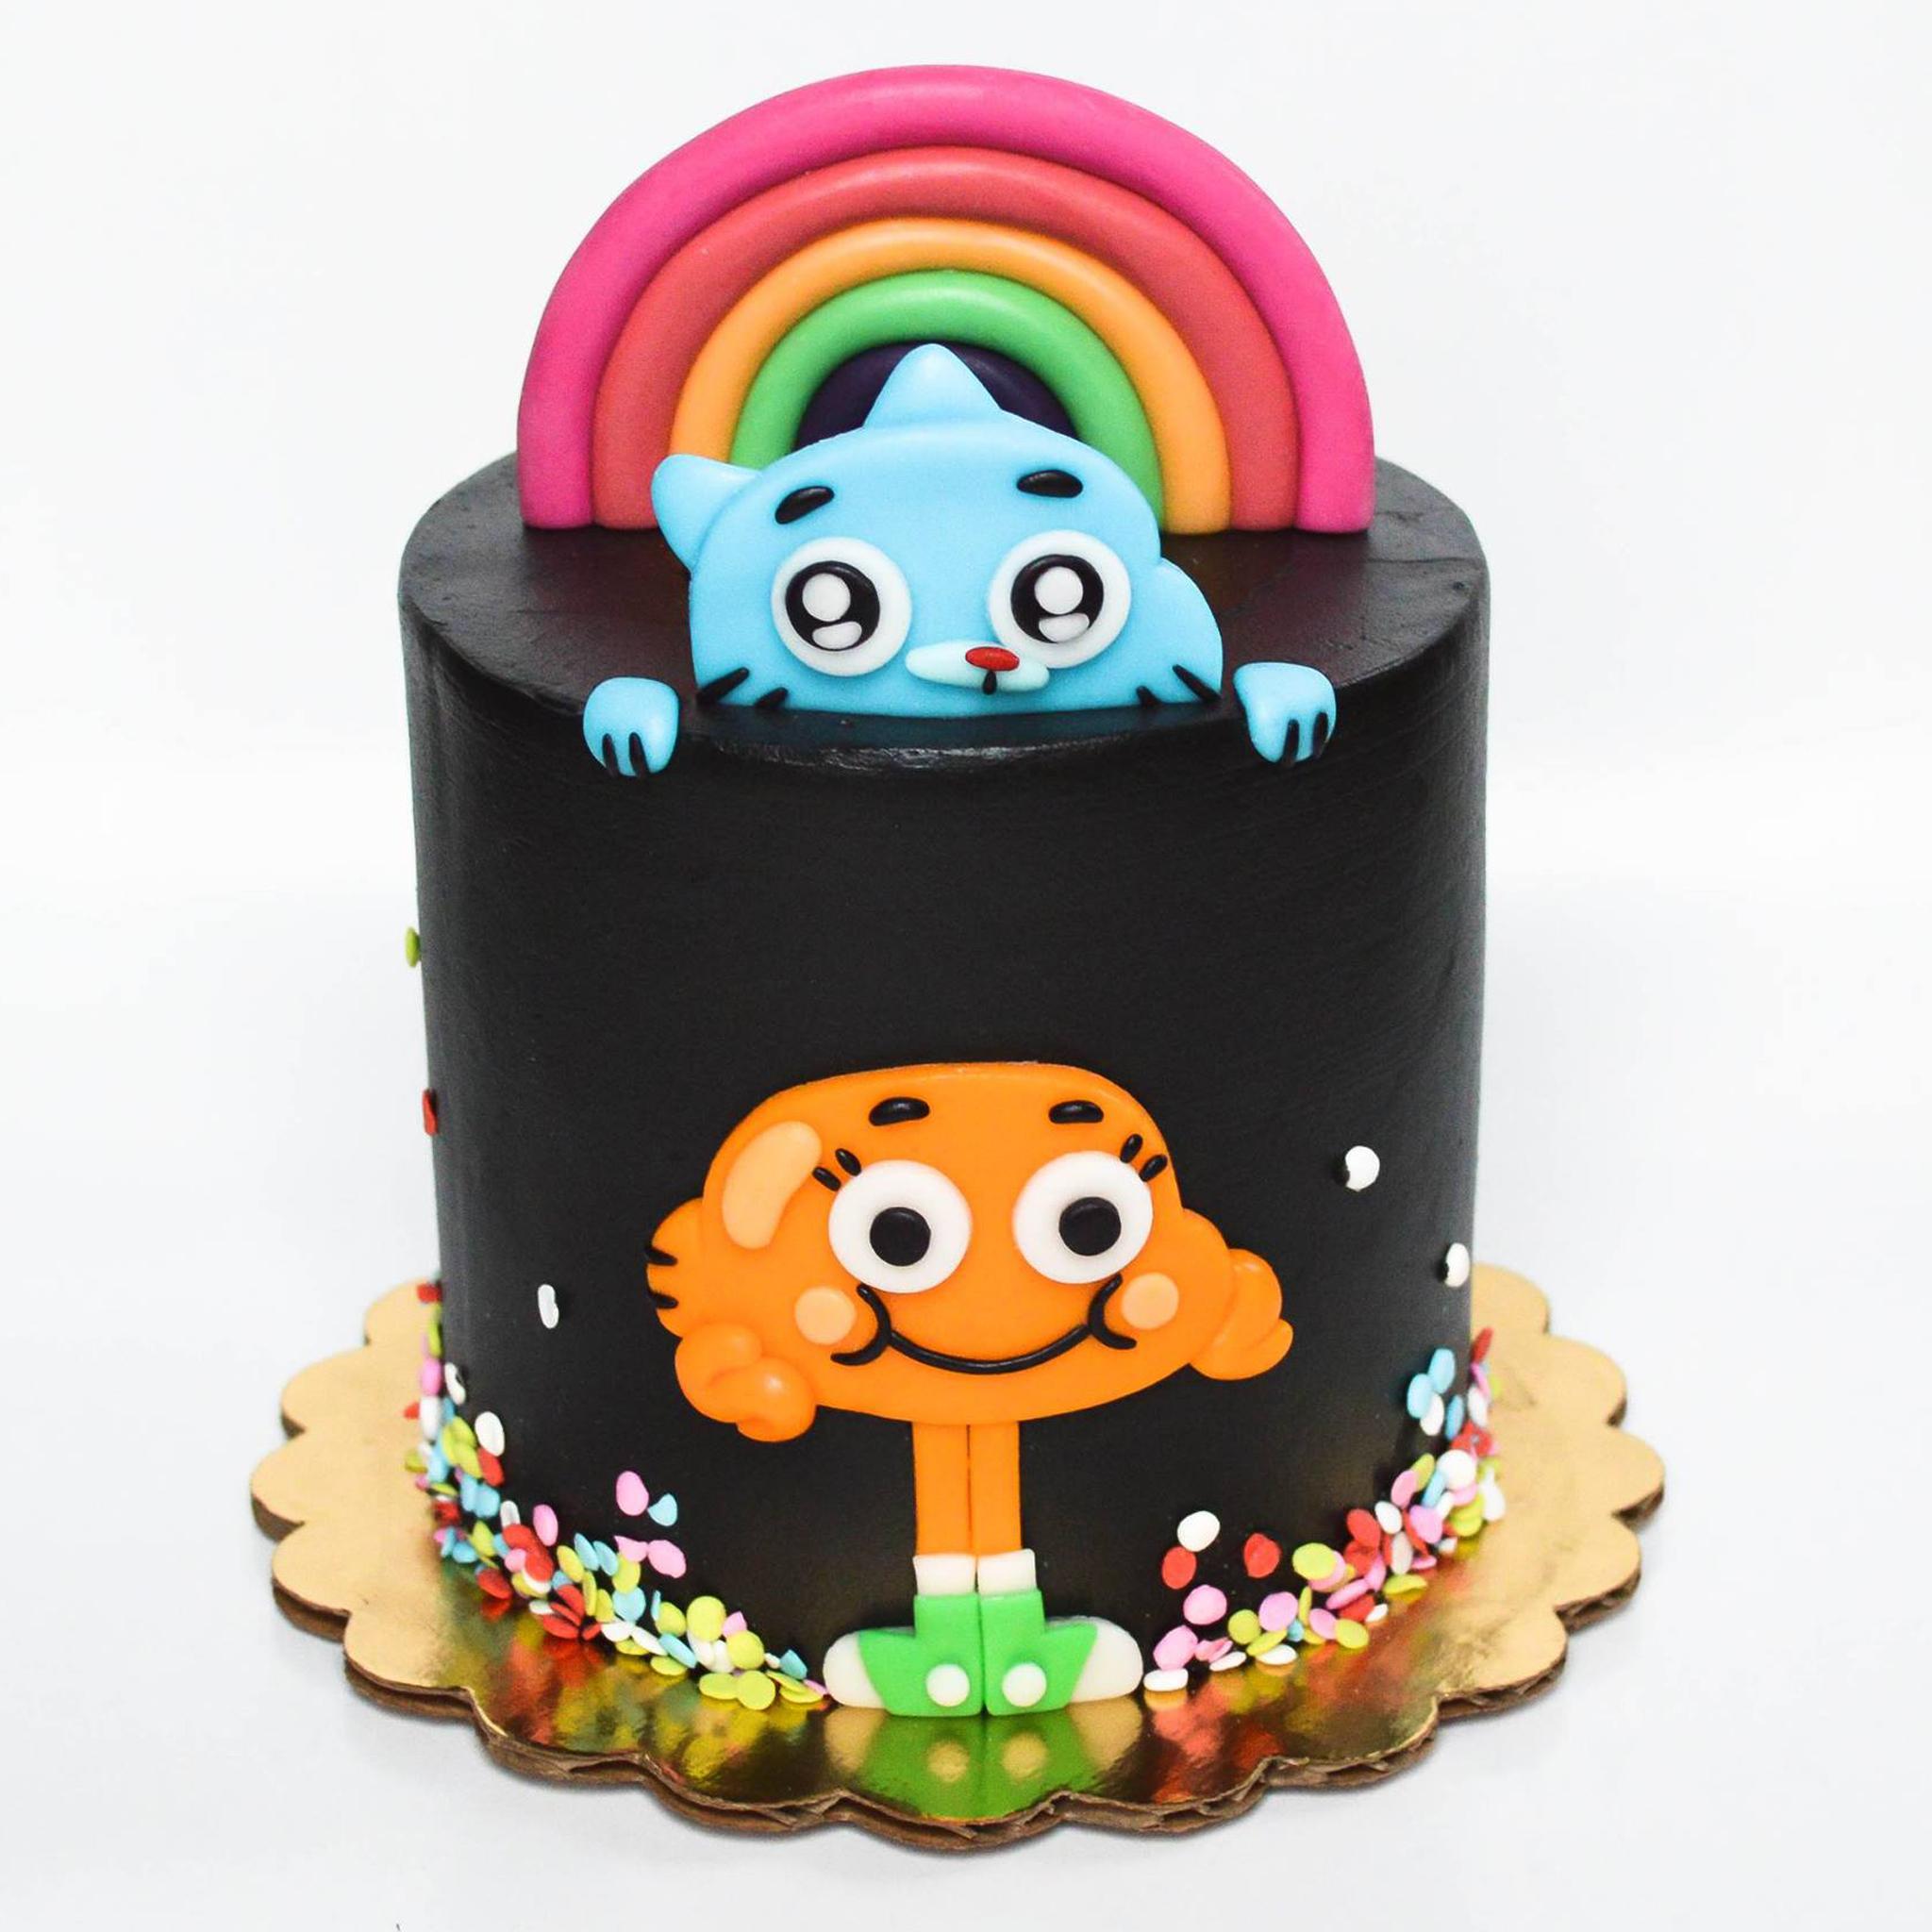 Cartoon Network on X: "It's #NationalCakeDay! 🎂 Here's Gumball &amp; Darwin on a cake...enjoy. #Gumball #tawog 📷: jamcakes82/Instagram https://t.co/zhaCJmqGE4" / X